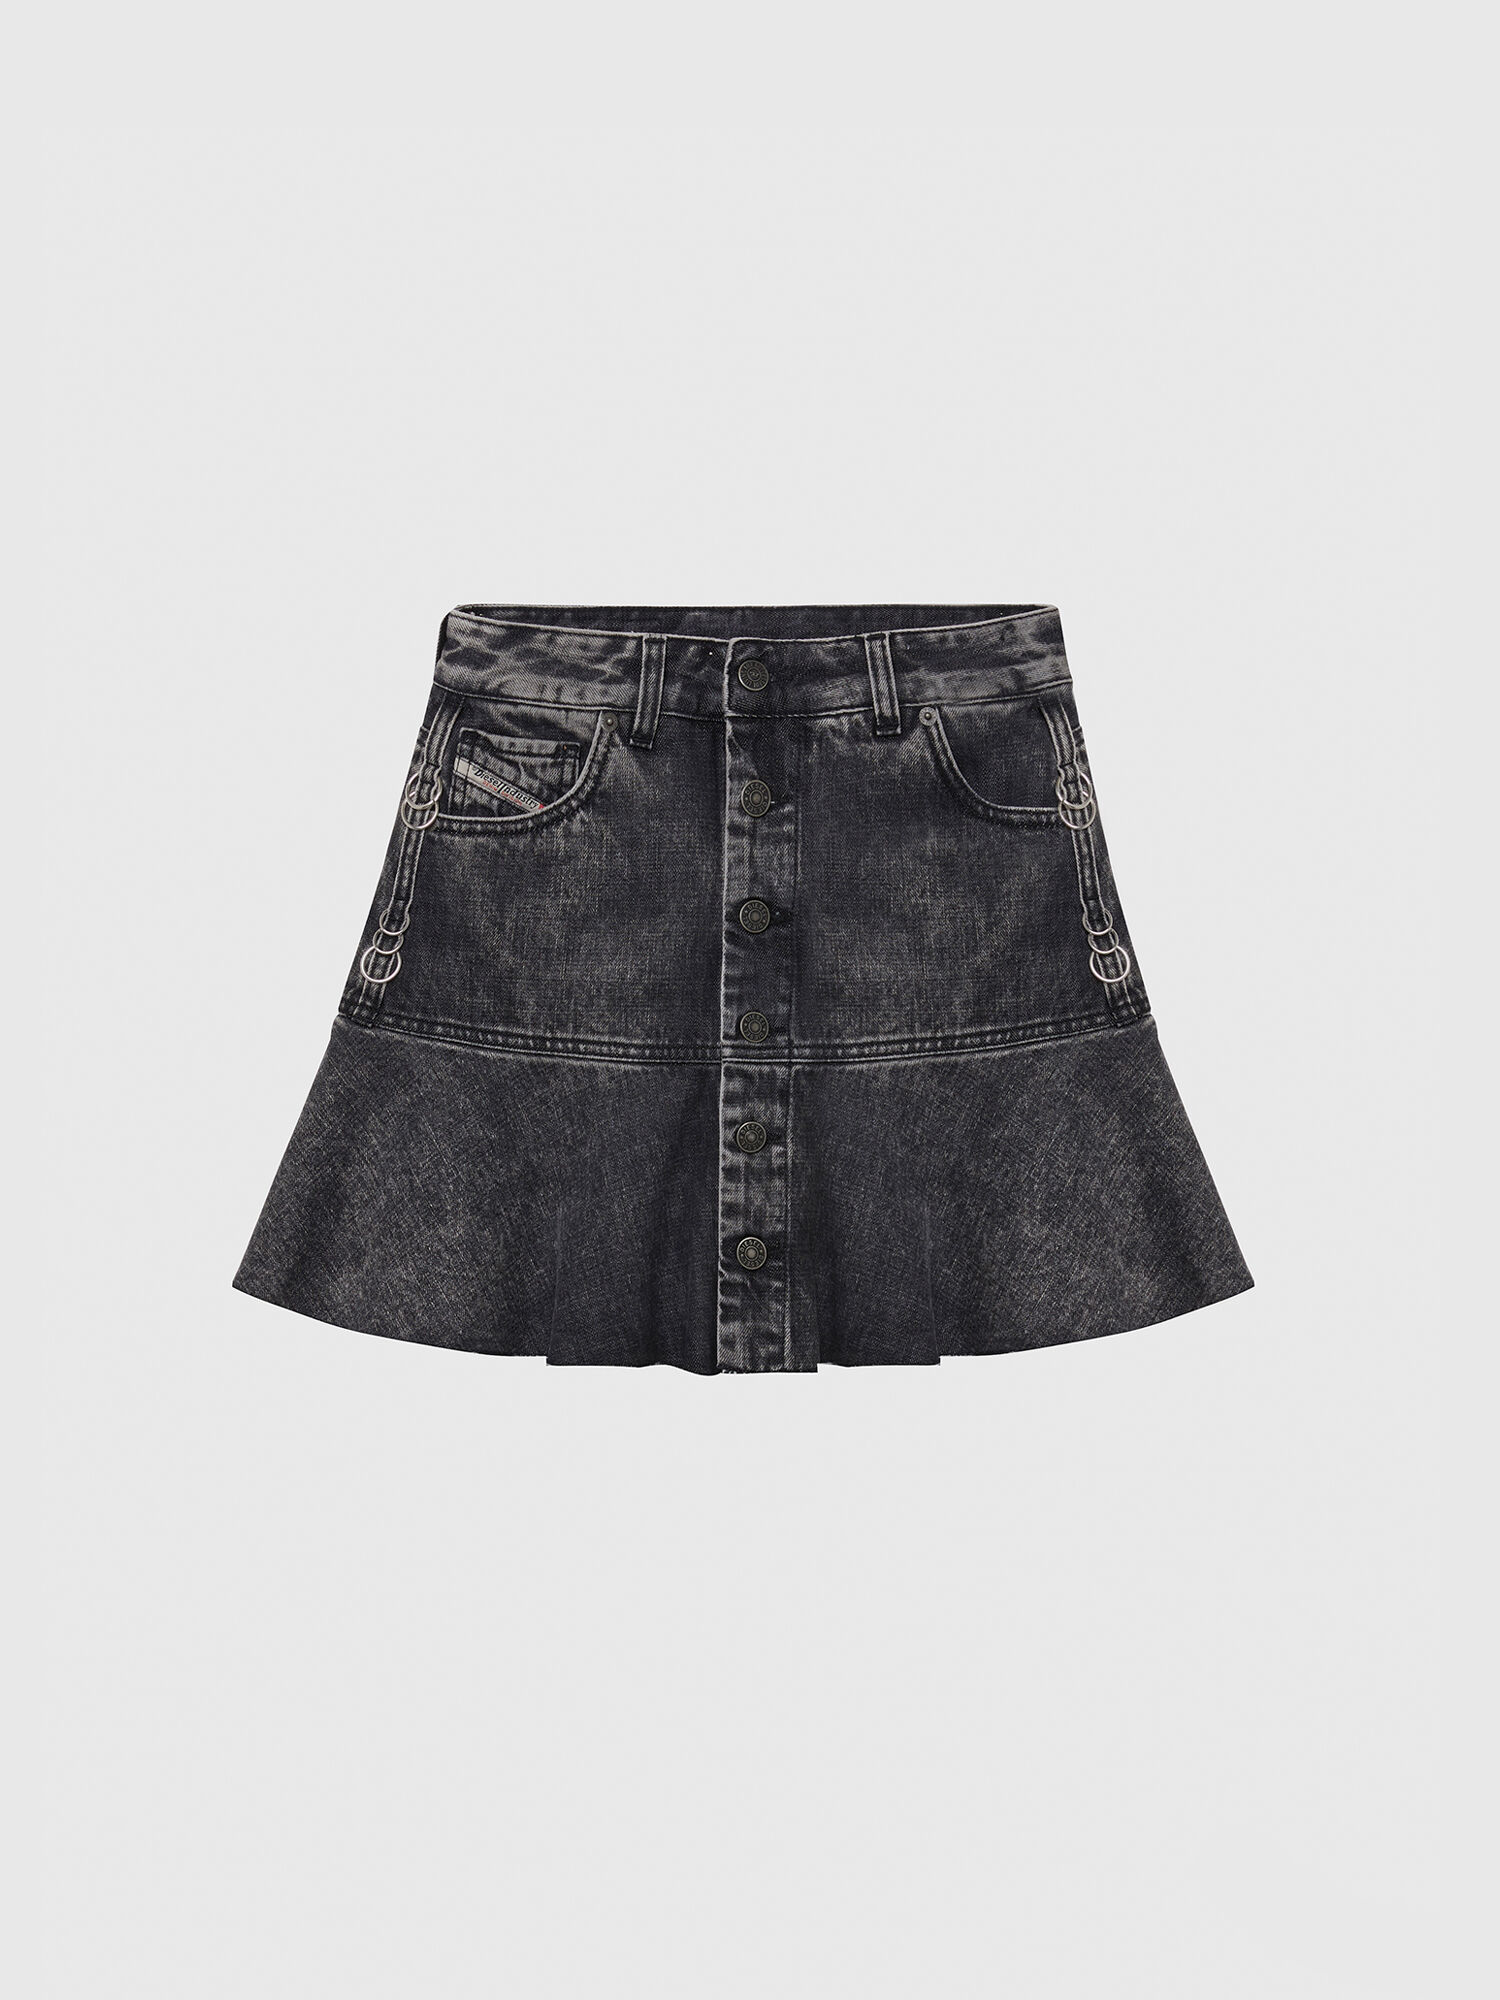 low rise jeans shorts